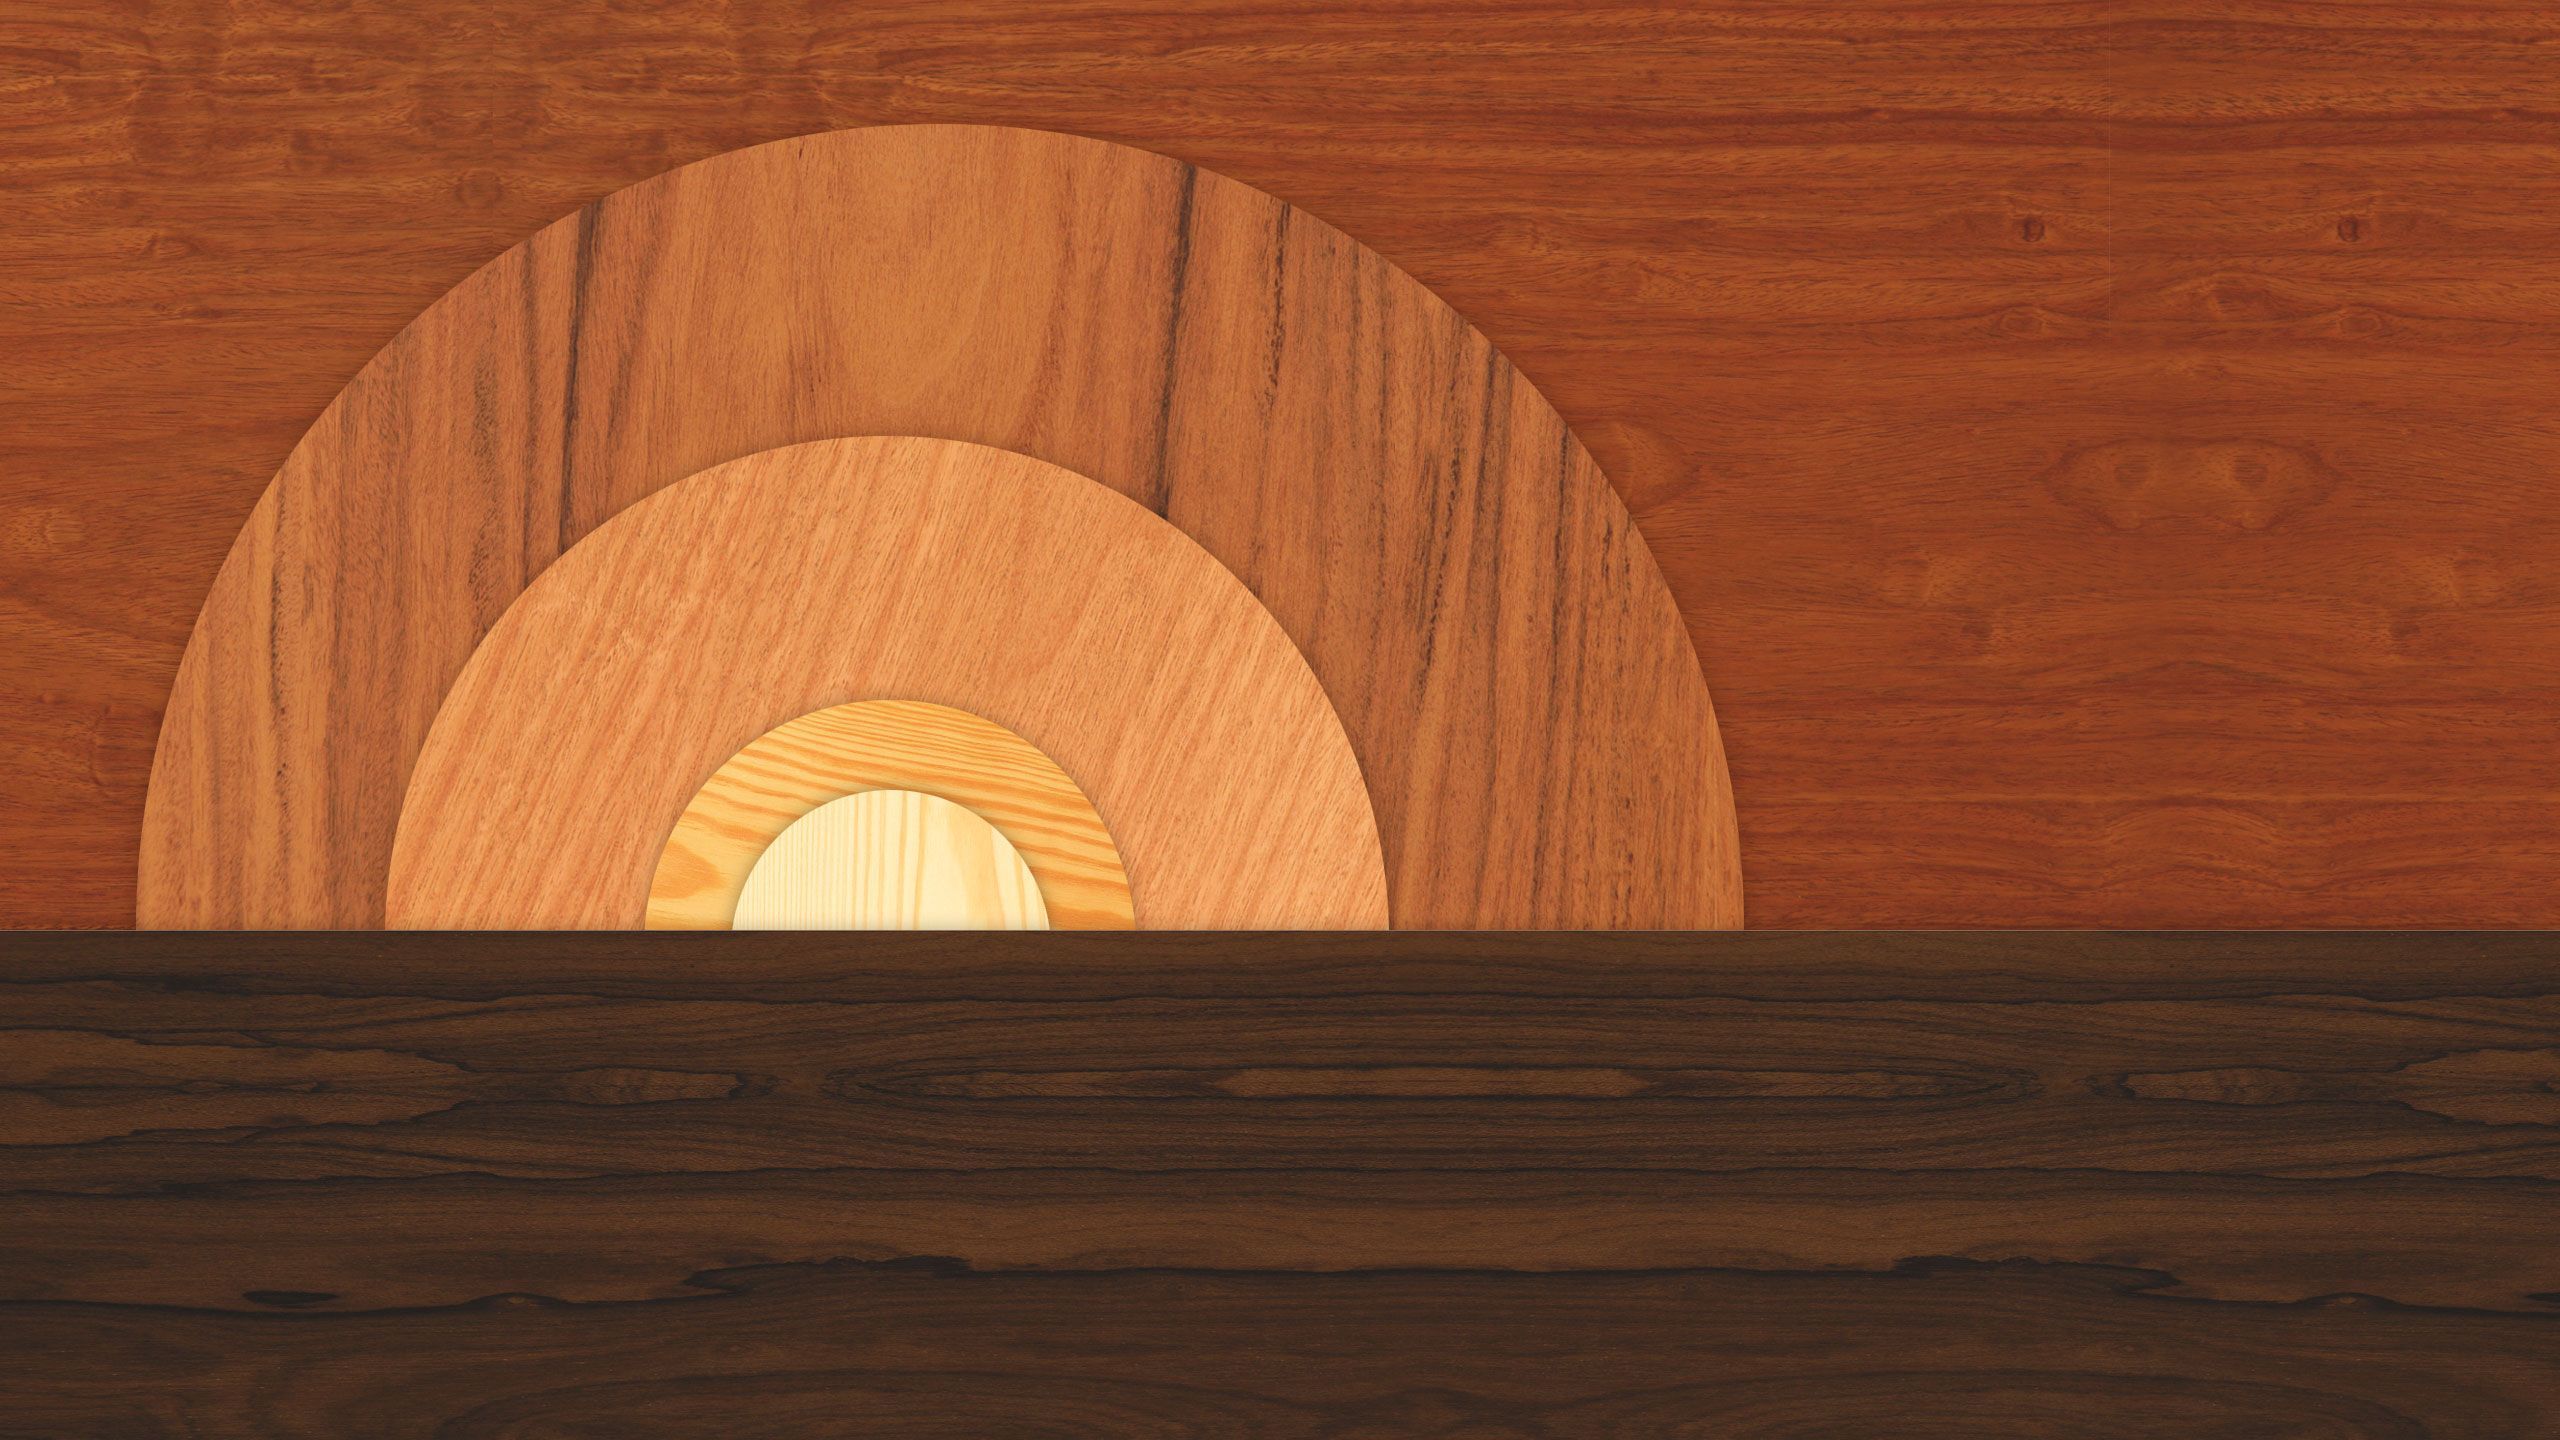 Weekly Wallpaper Give Your Desktop A Wooden Finish Lifehacker